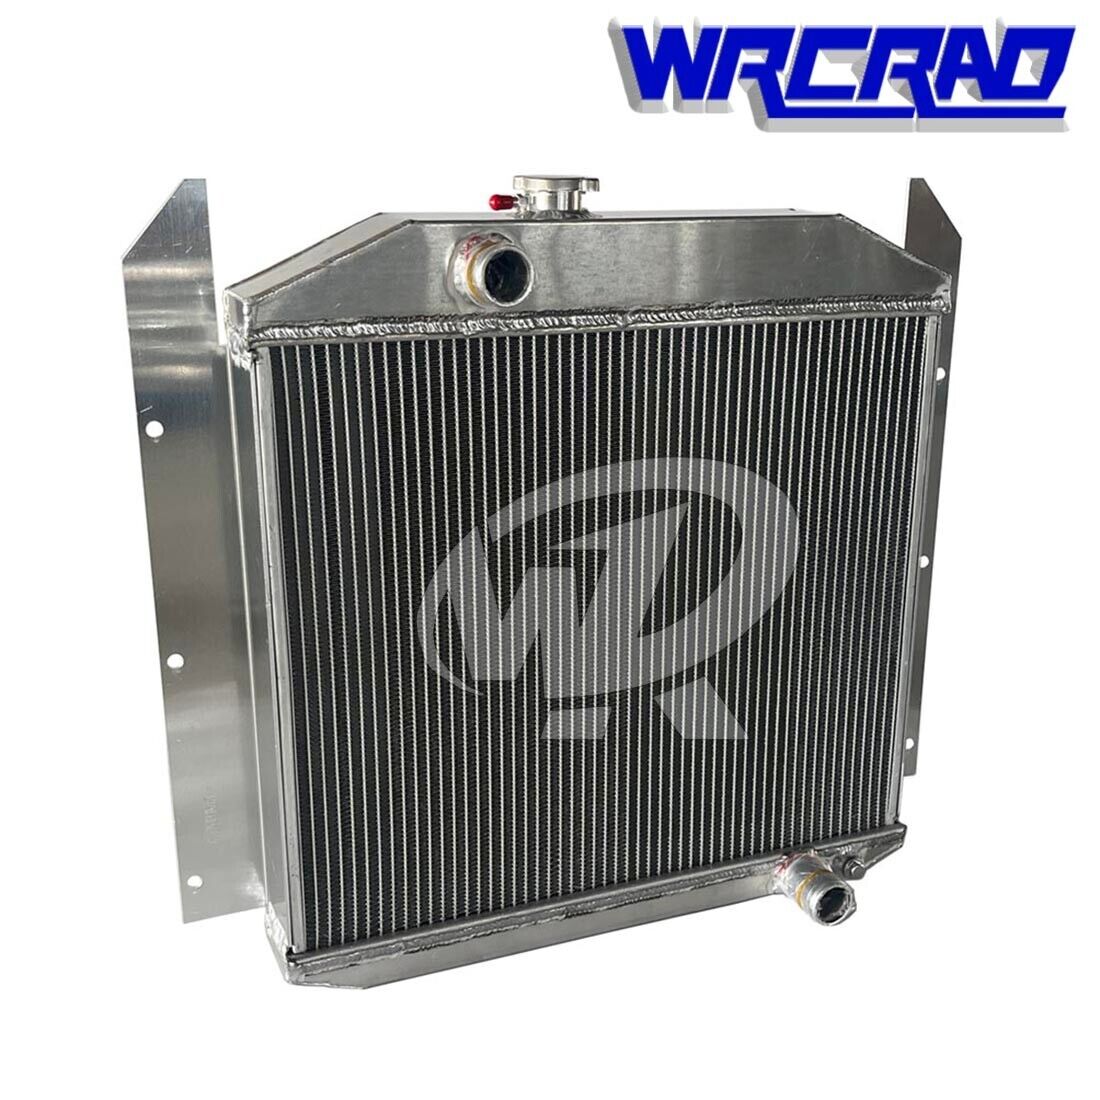 2 Row Aluminum Cooling Radiator for 1949-1952 1950 Studebaker 2R10 2.8L l6 GAS